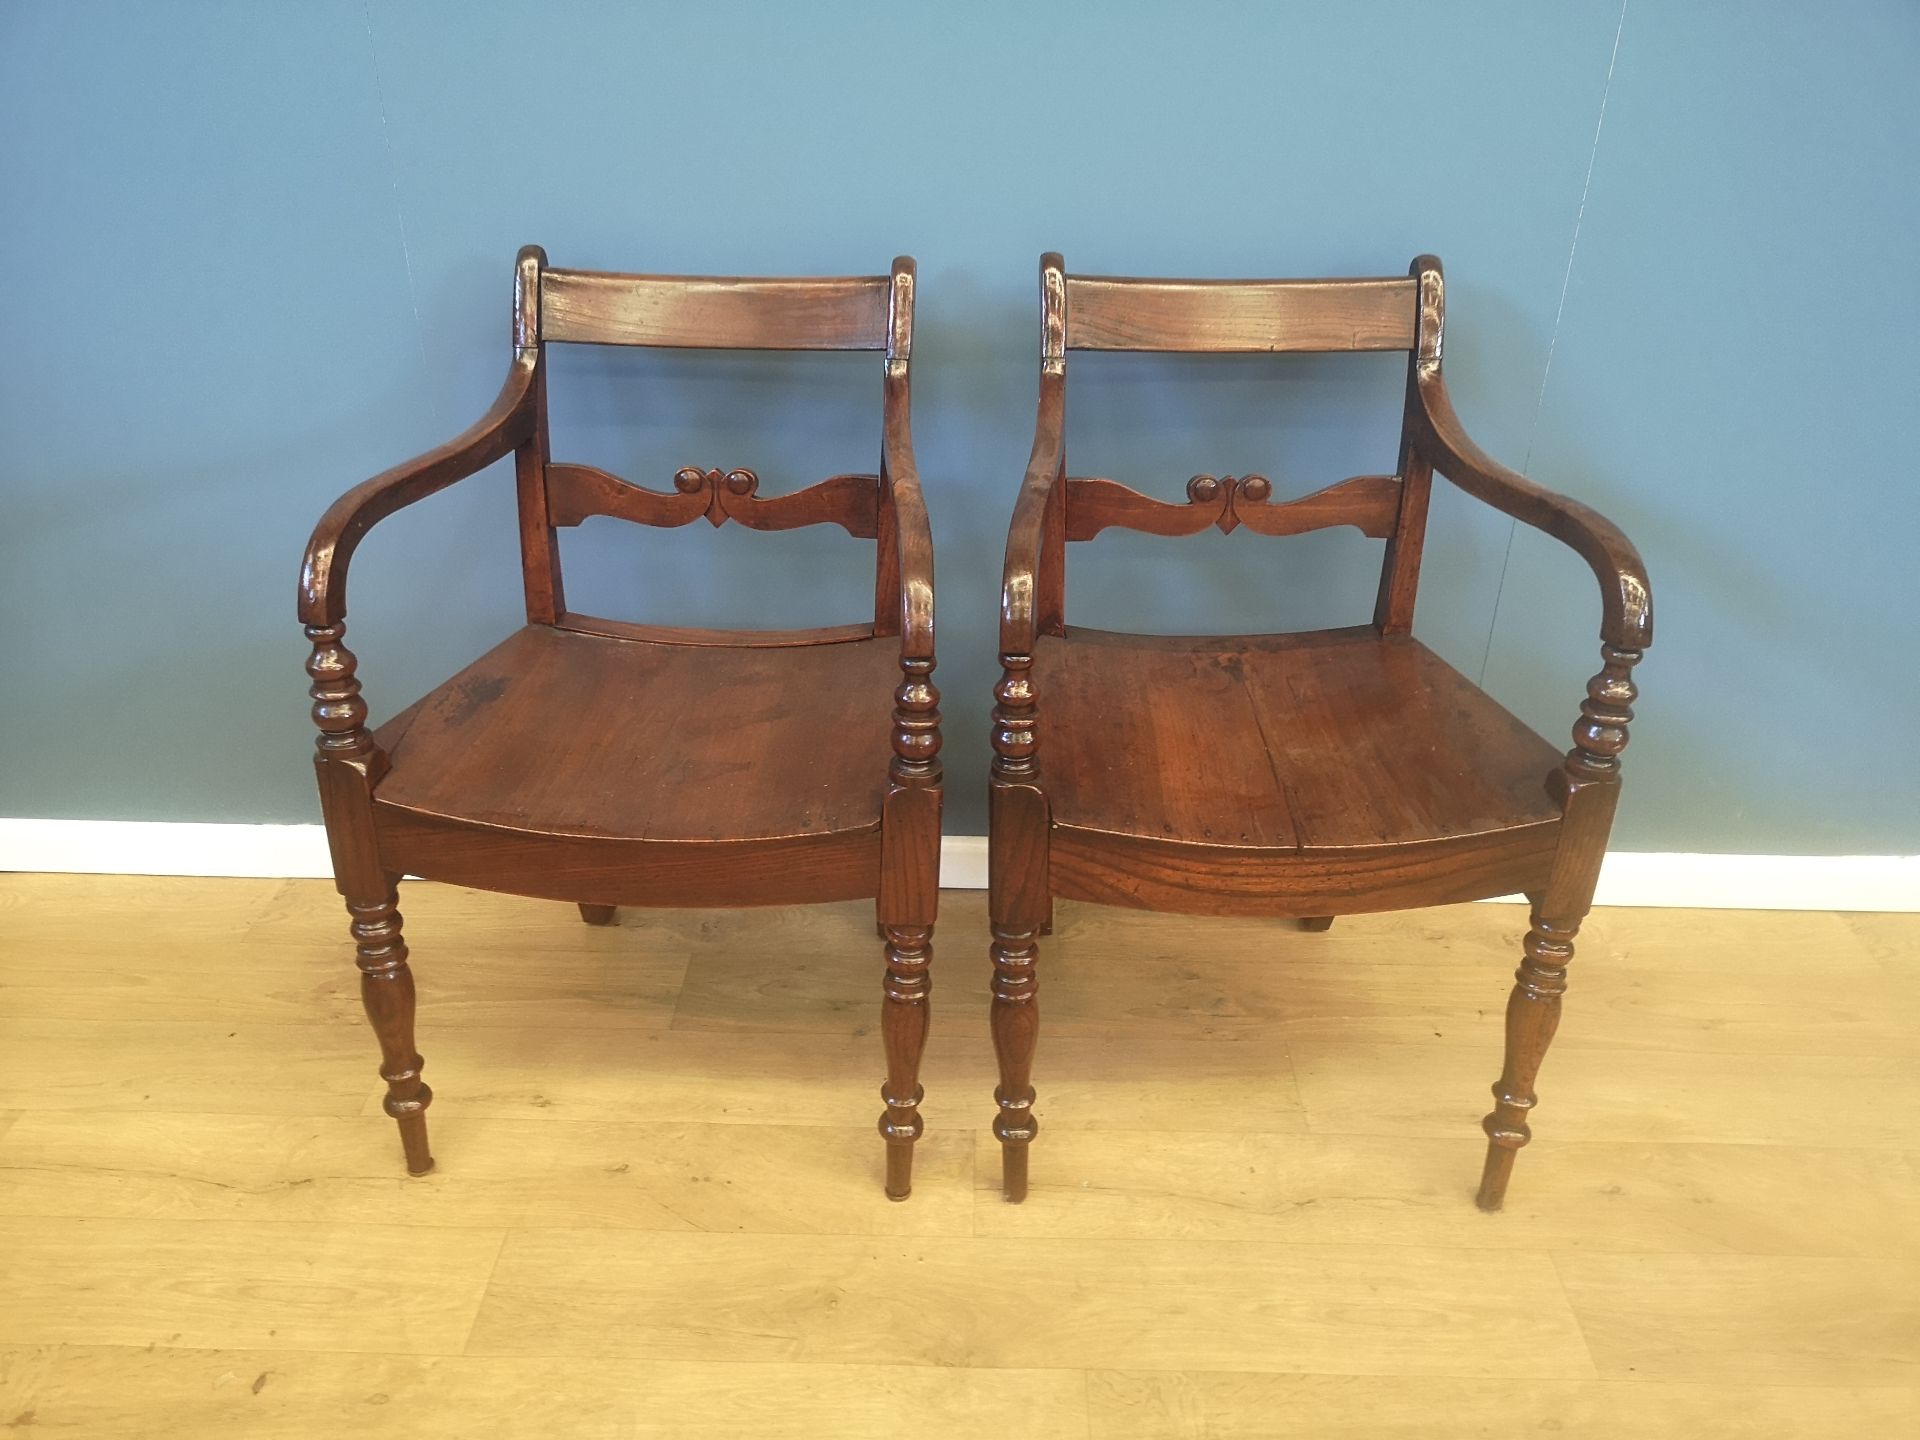 Two 19th century open armchairs